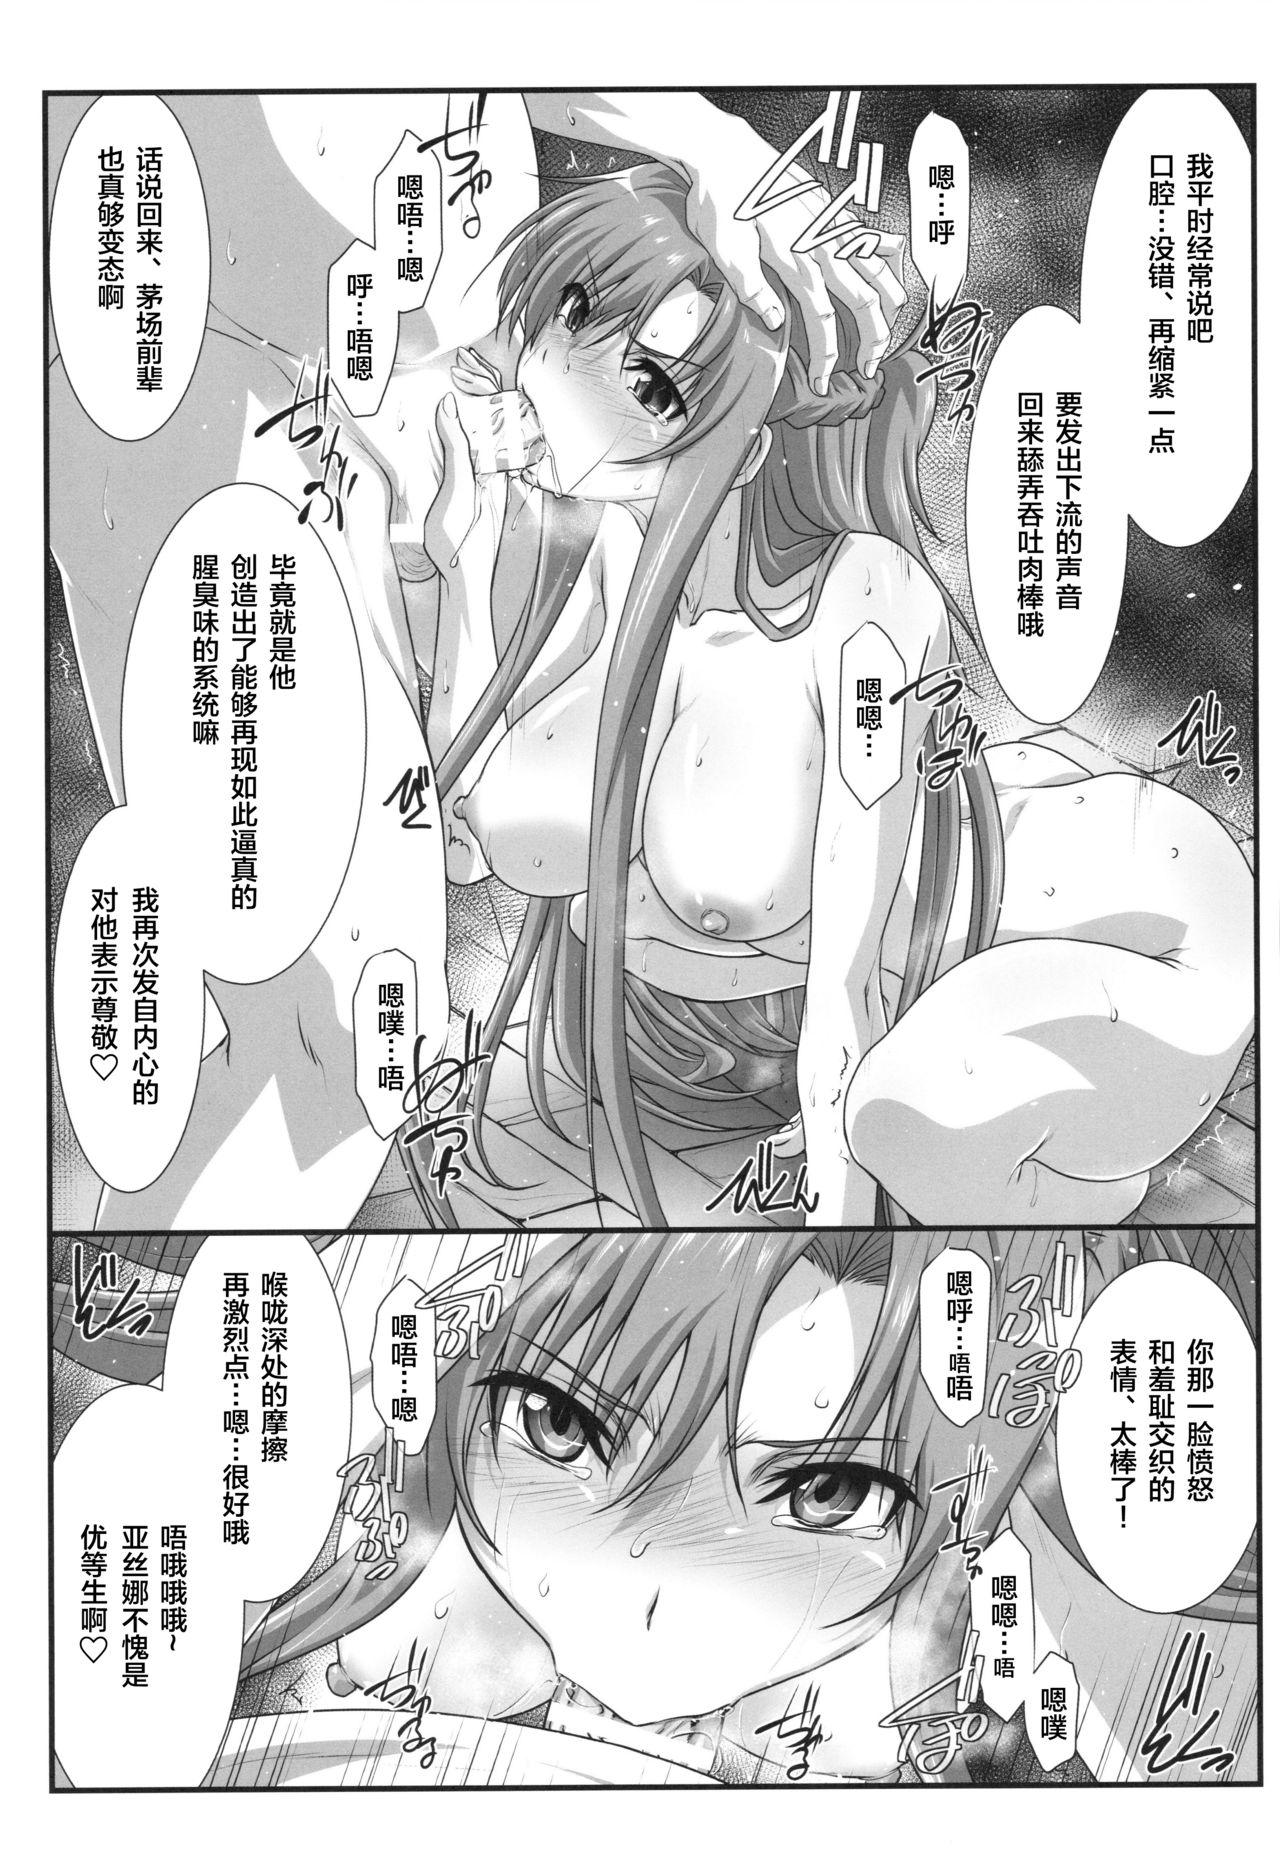 Spread Astral Bout Ver. 41 - Sword art online Natural Boobs - Page 6